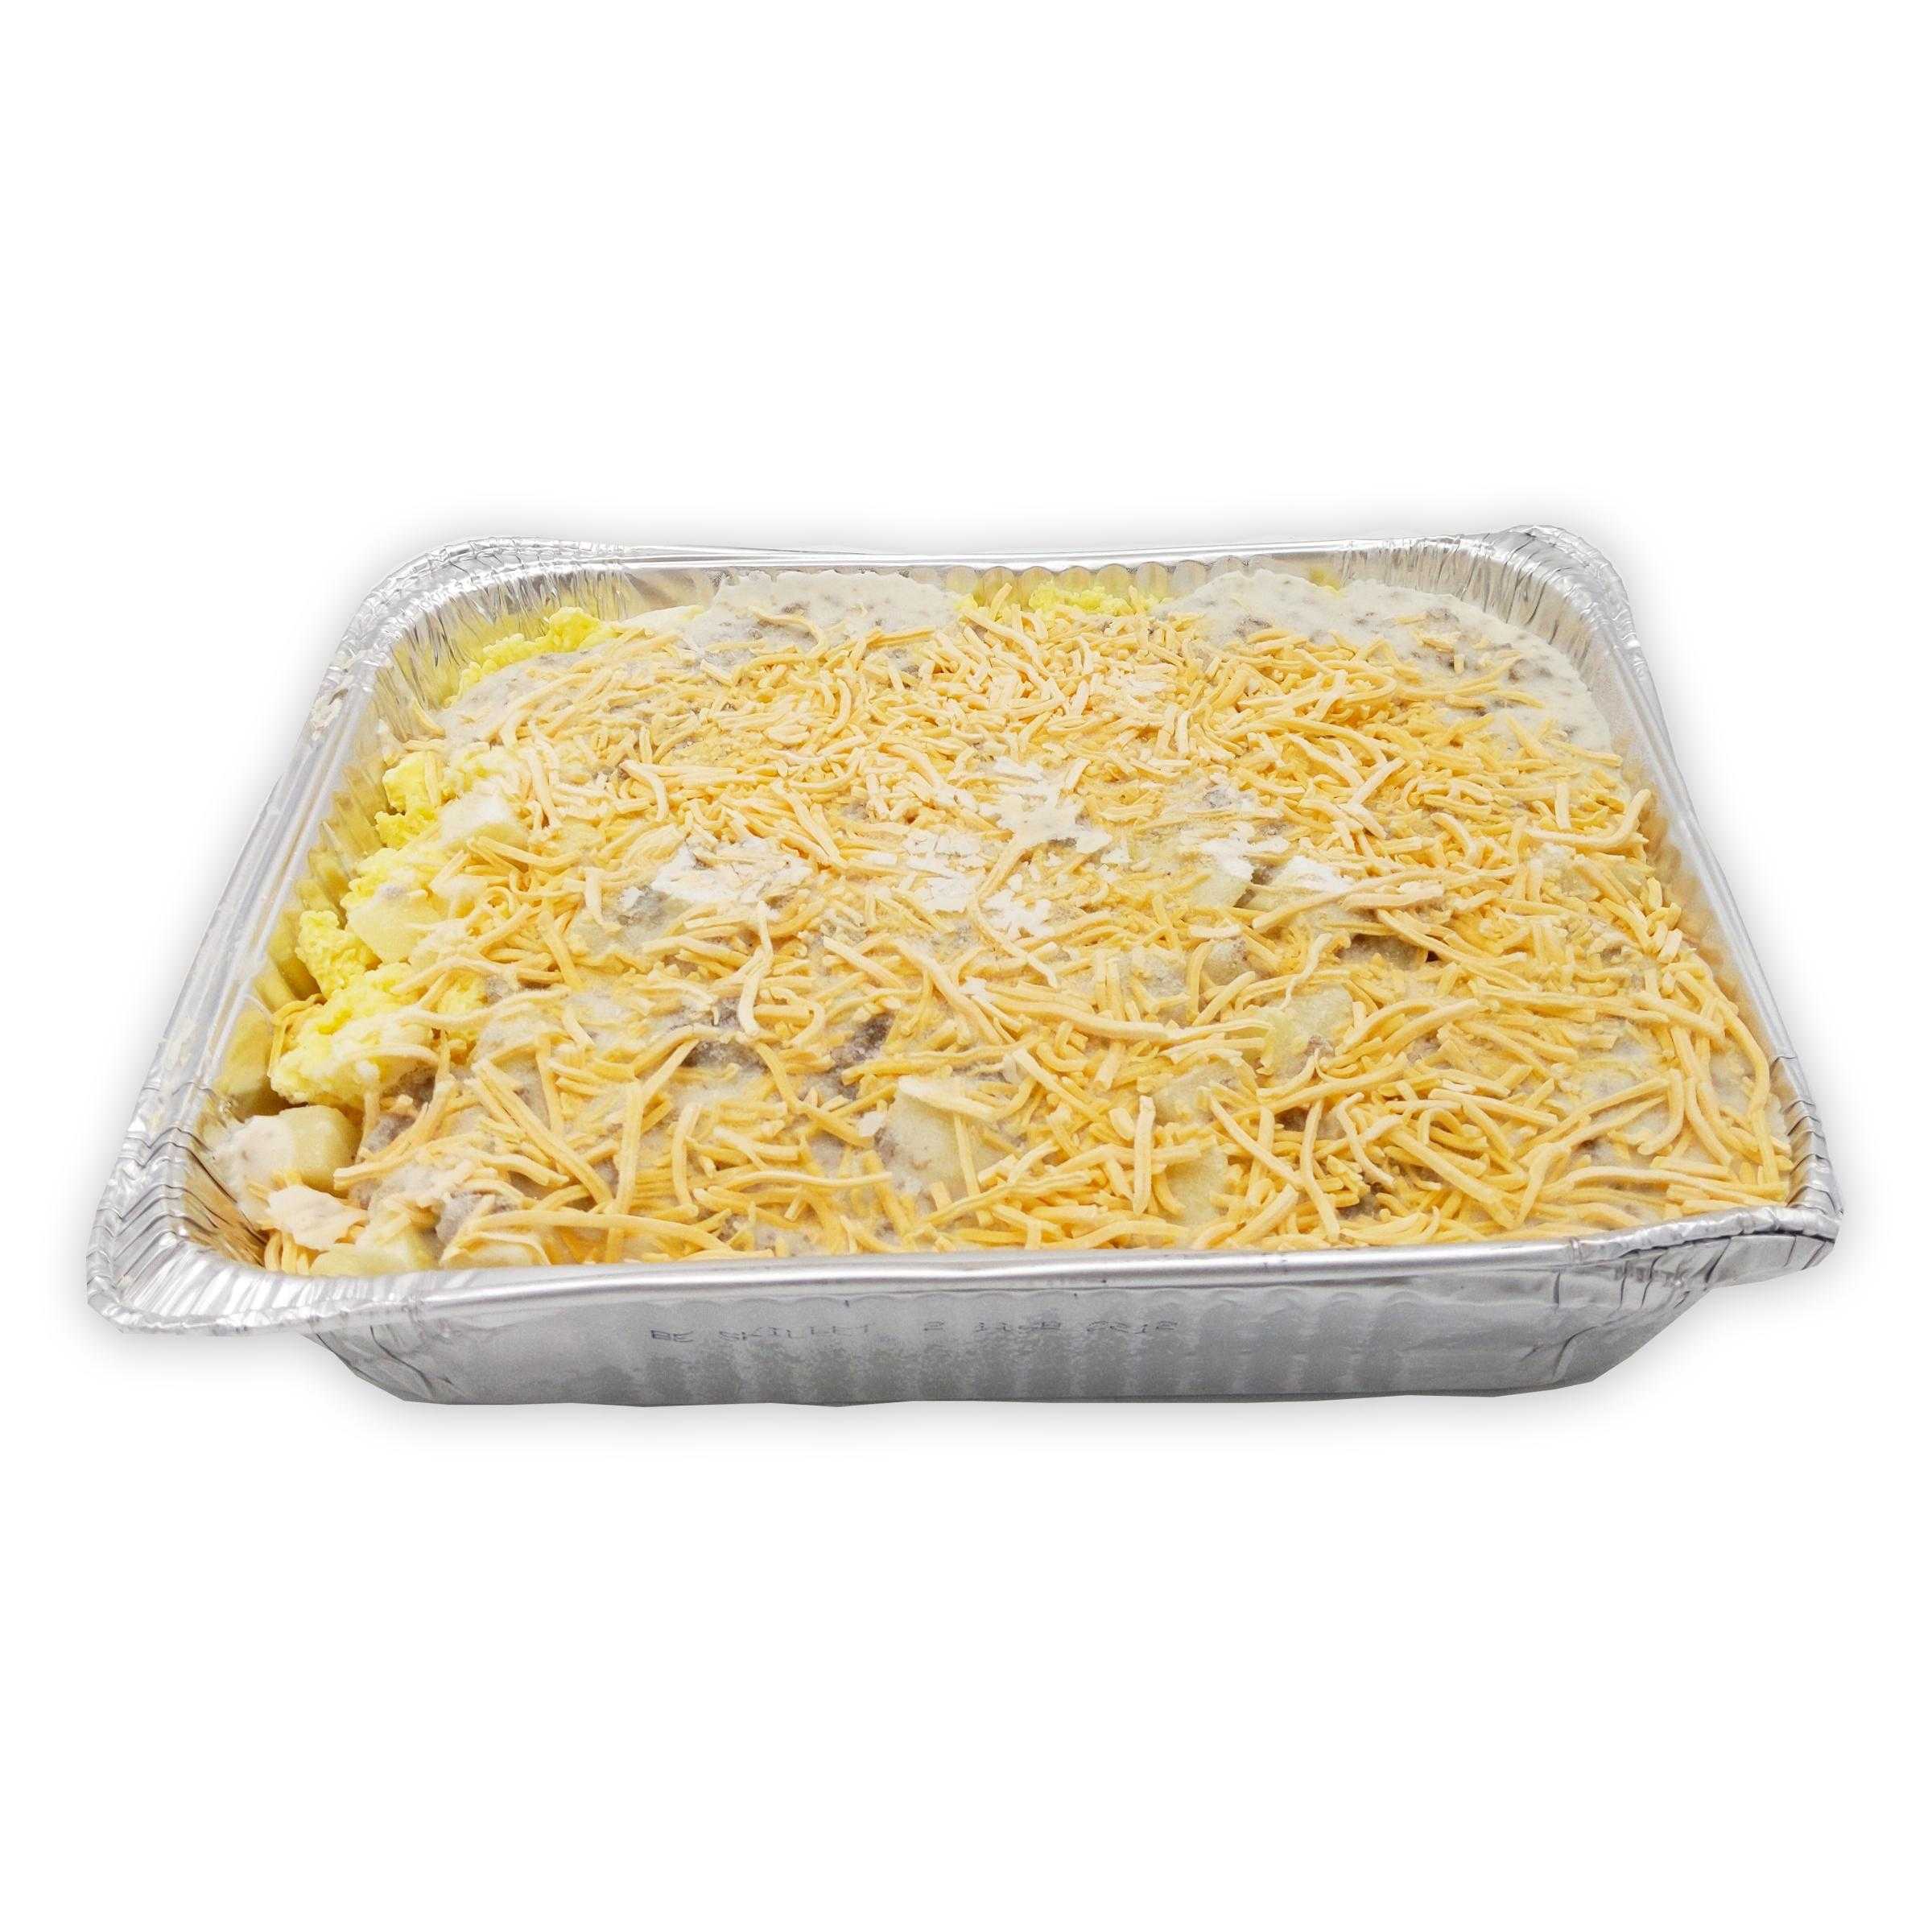 Bob Evans Frozen Homestyle Breakfast Bake With Country Gravy, Sausage, Eggs, Potatoes, And Cheddar Cheese, 4/5 Lb